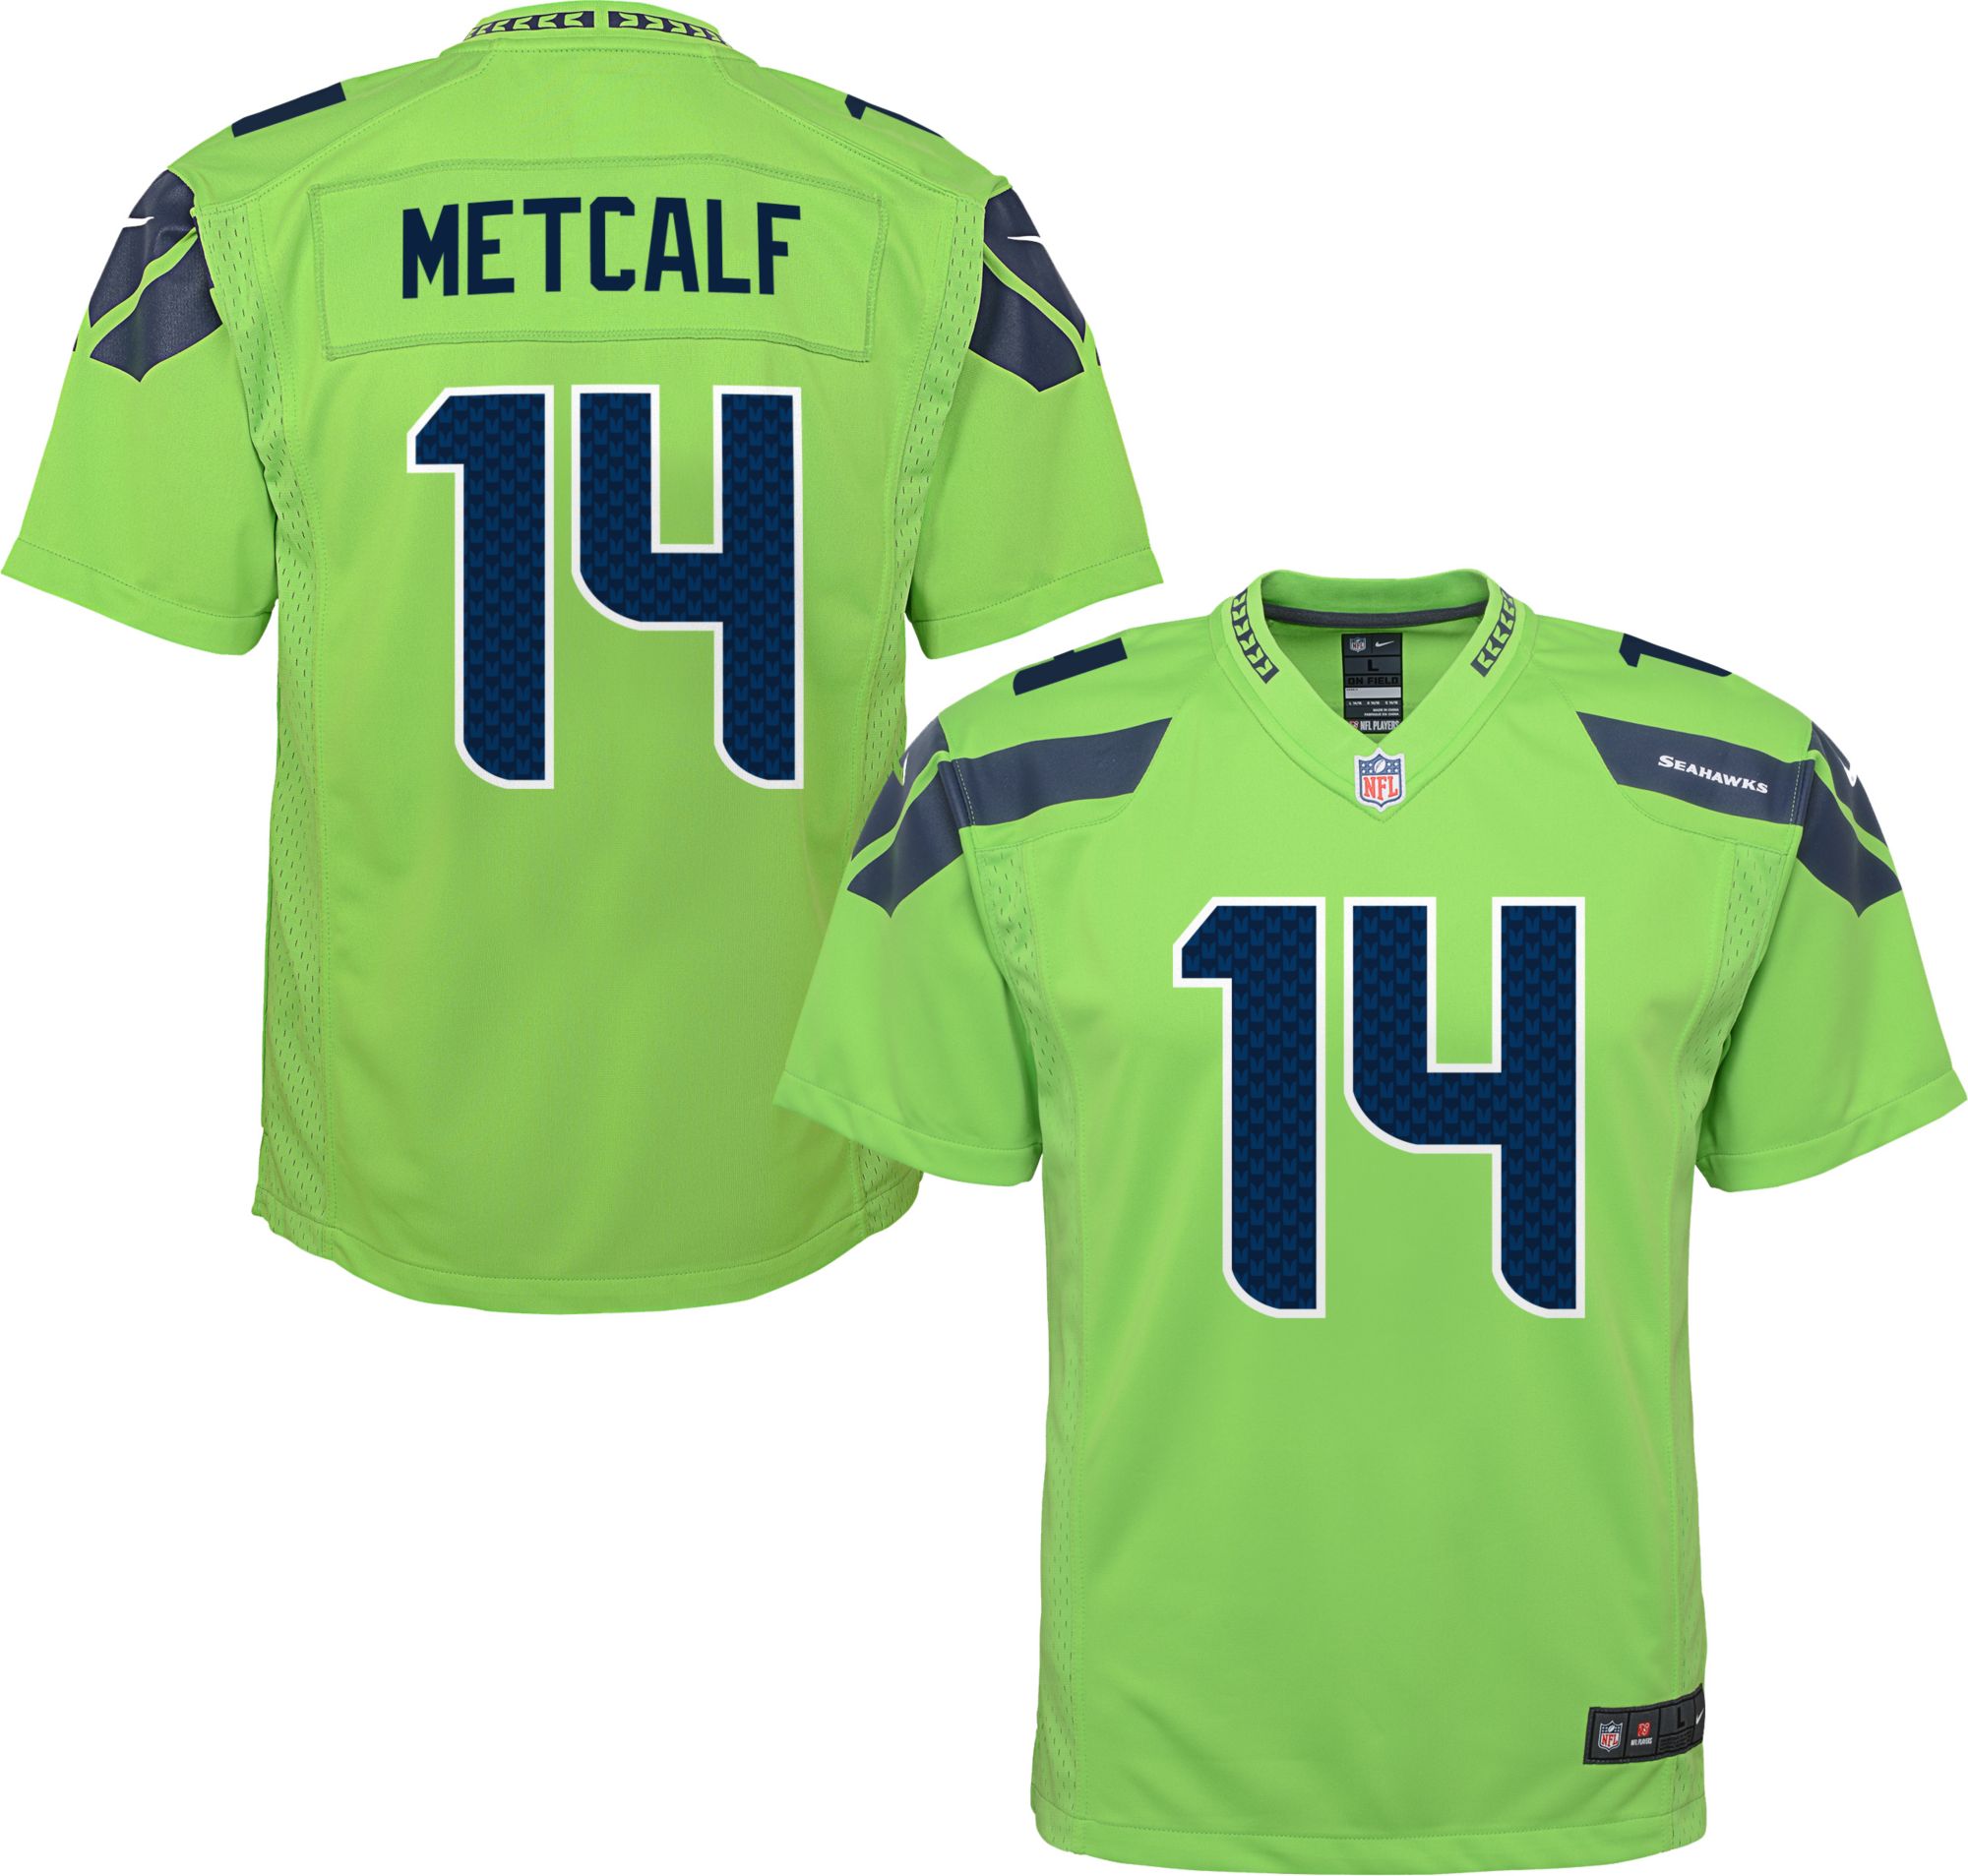 Youth Nike 12s Green Seattle Seahawks Color Rush Game